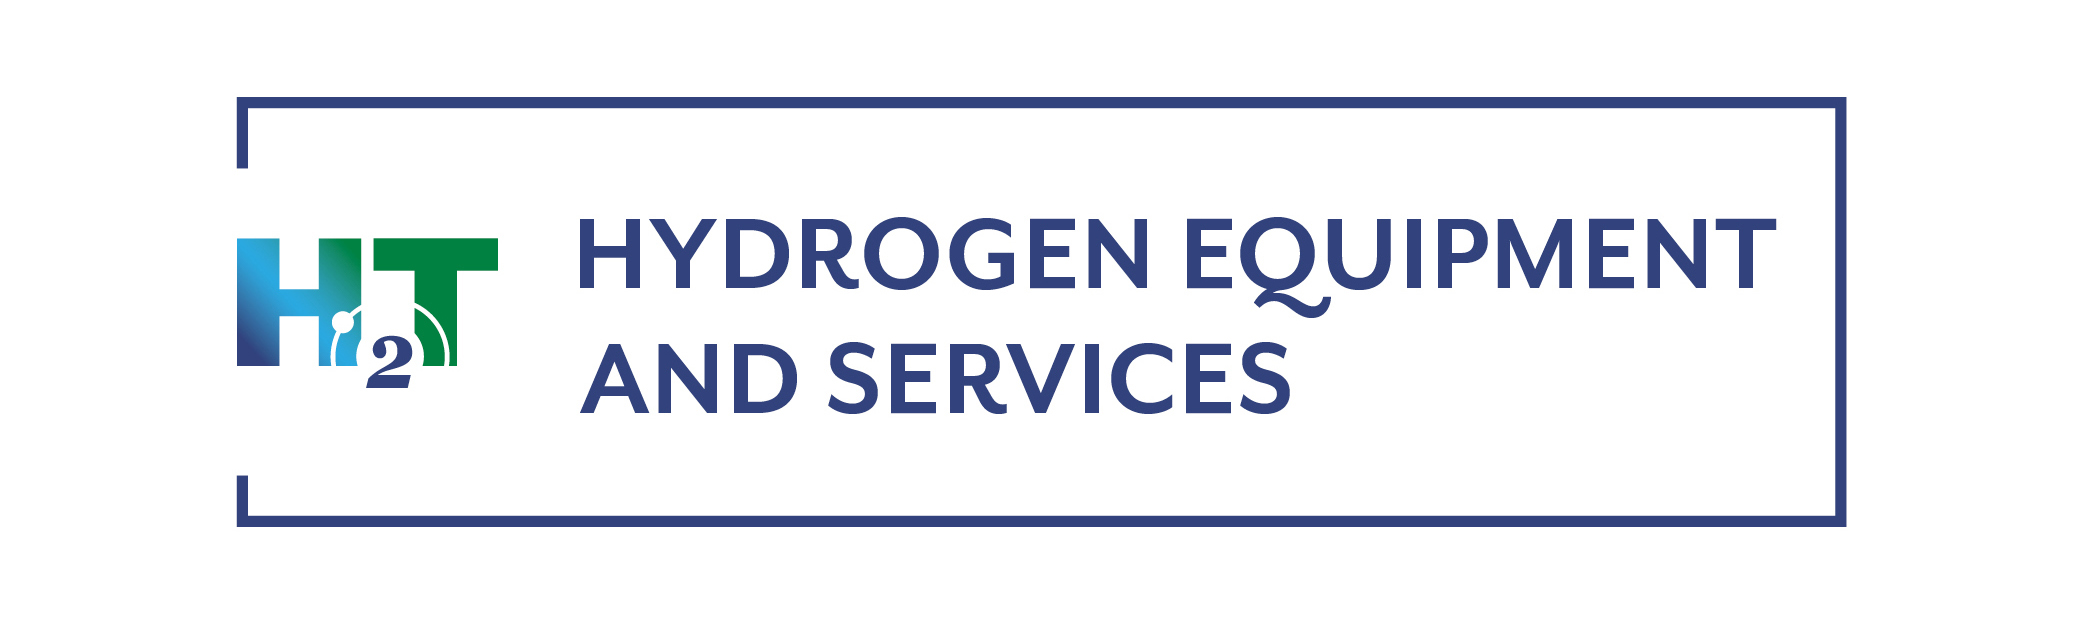 Hydrogen Equipment and Services—Mann (Atlas Copco Gas and Process)